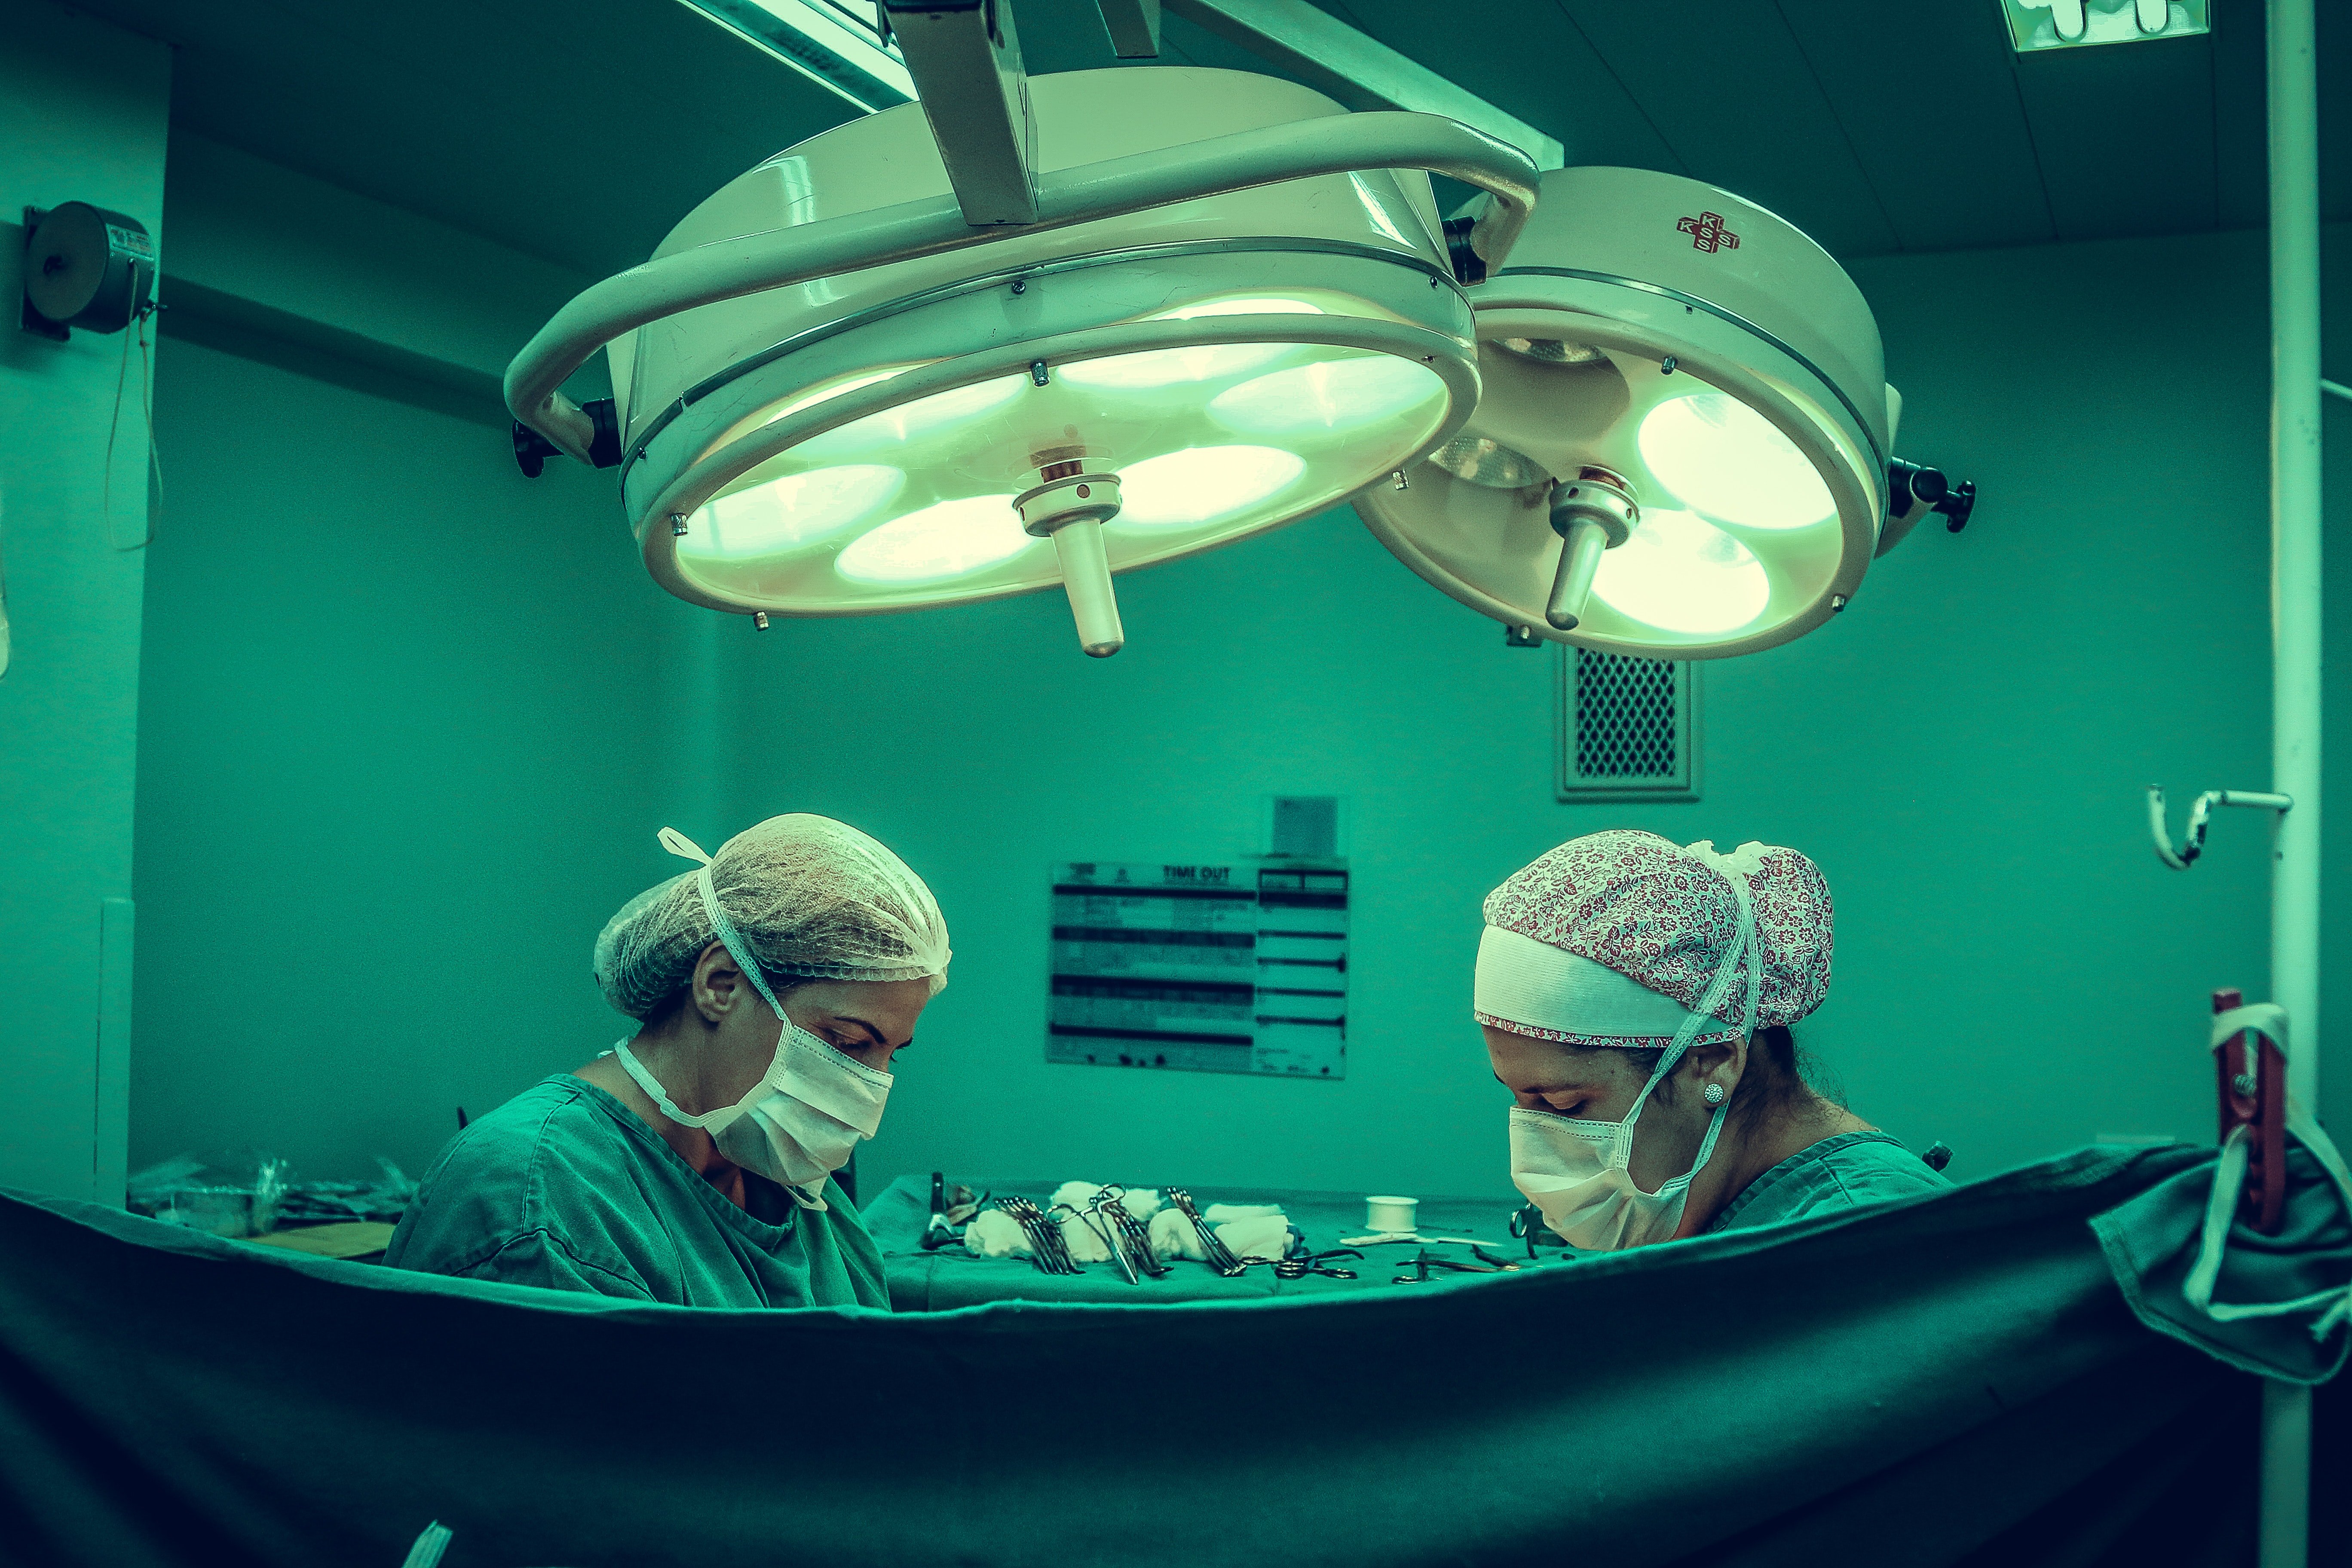 Pictured - Two surgeons performing surgery in theatre | Source: Pexels 